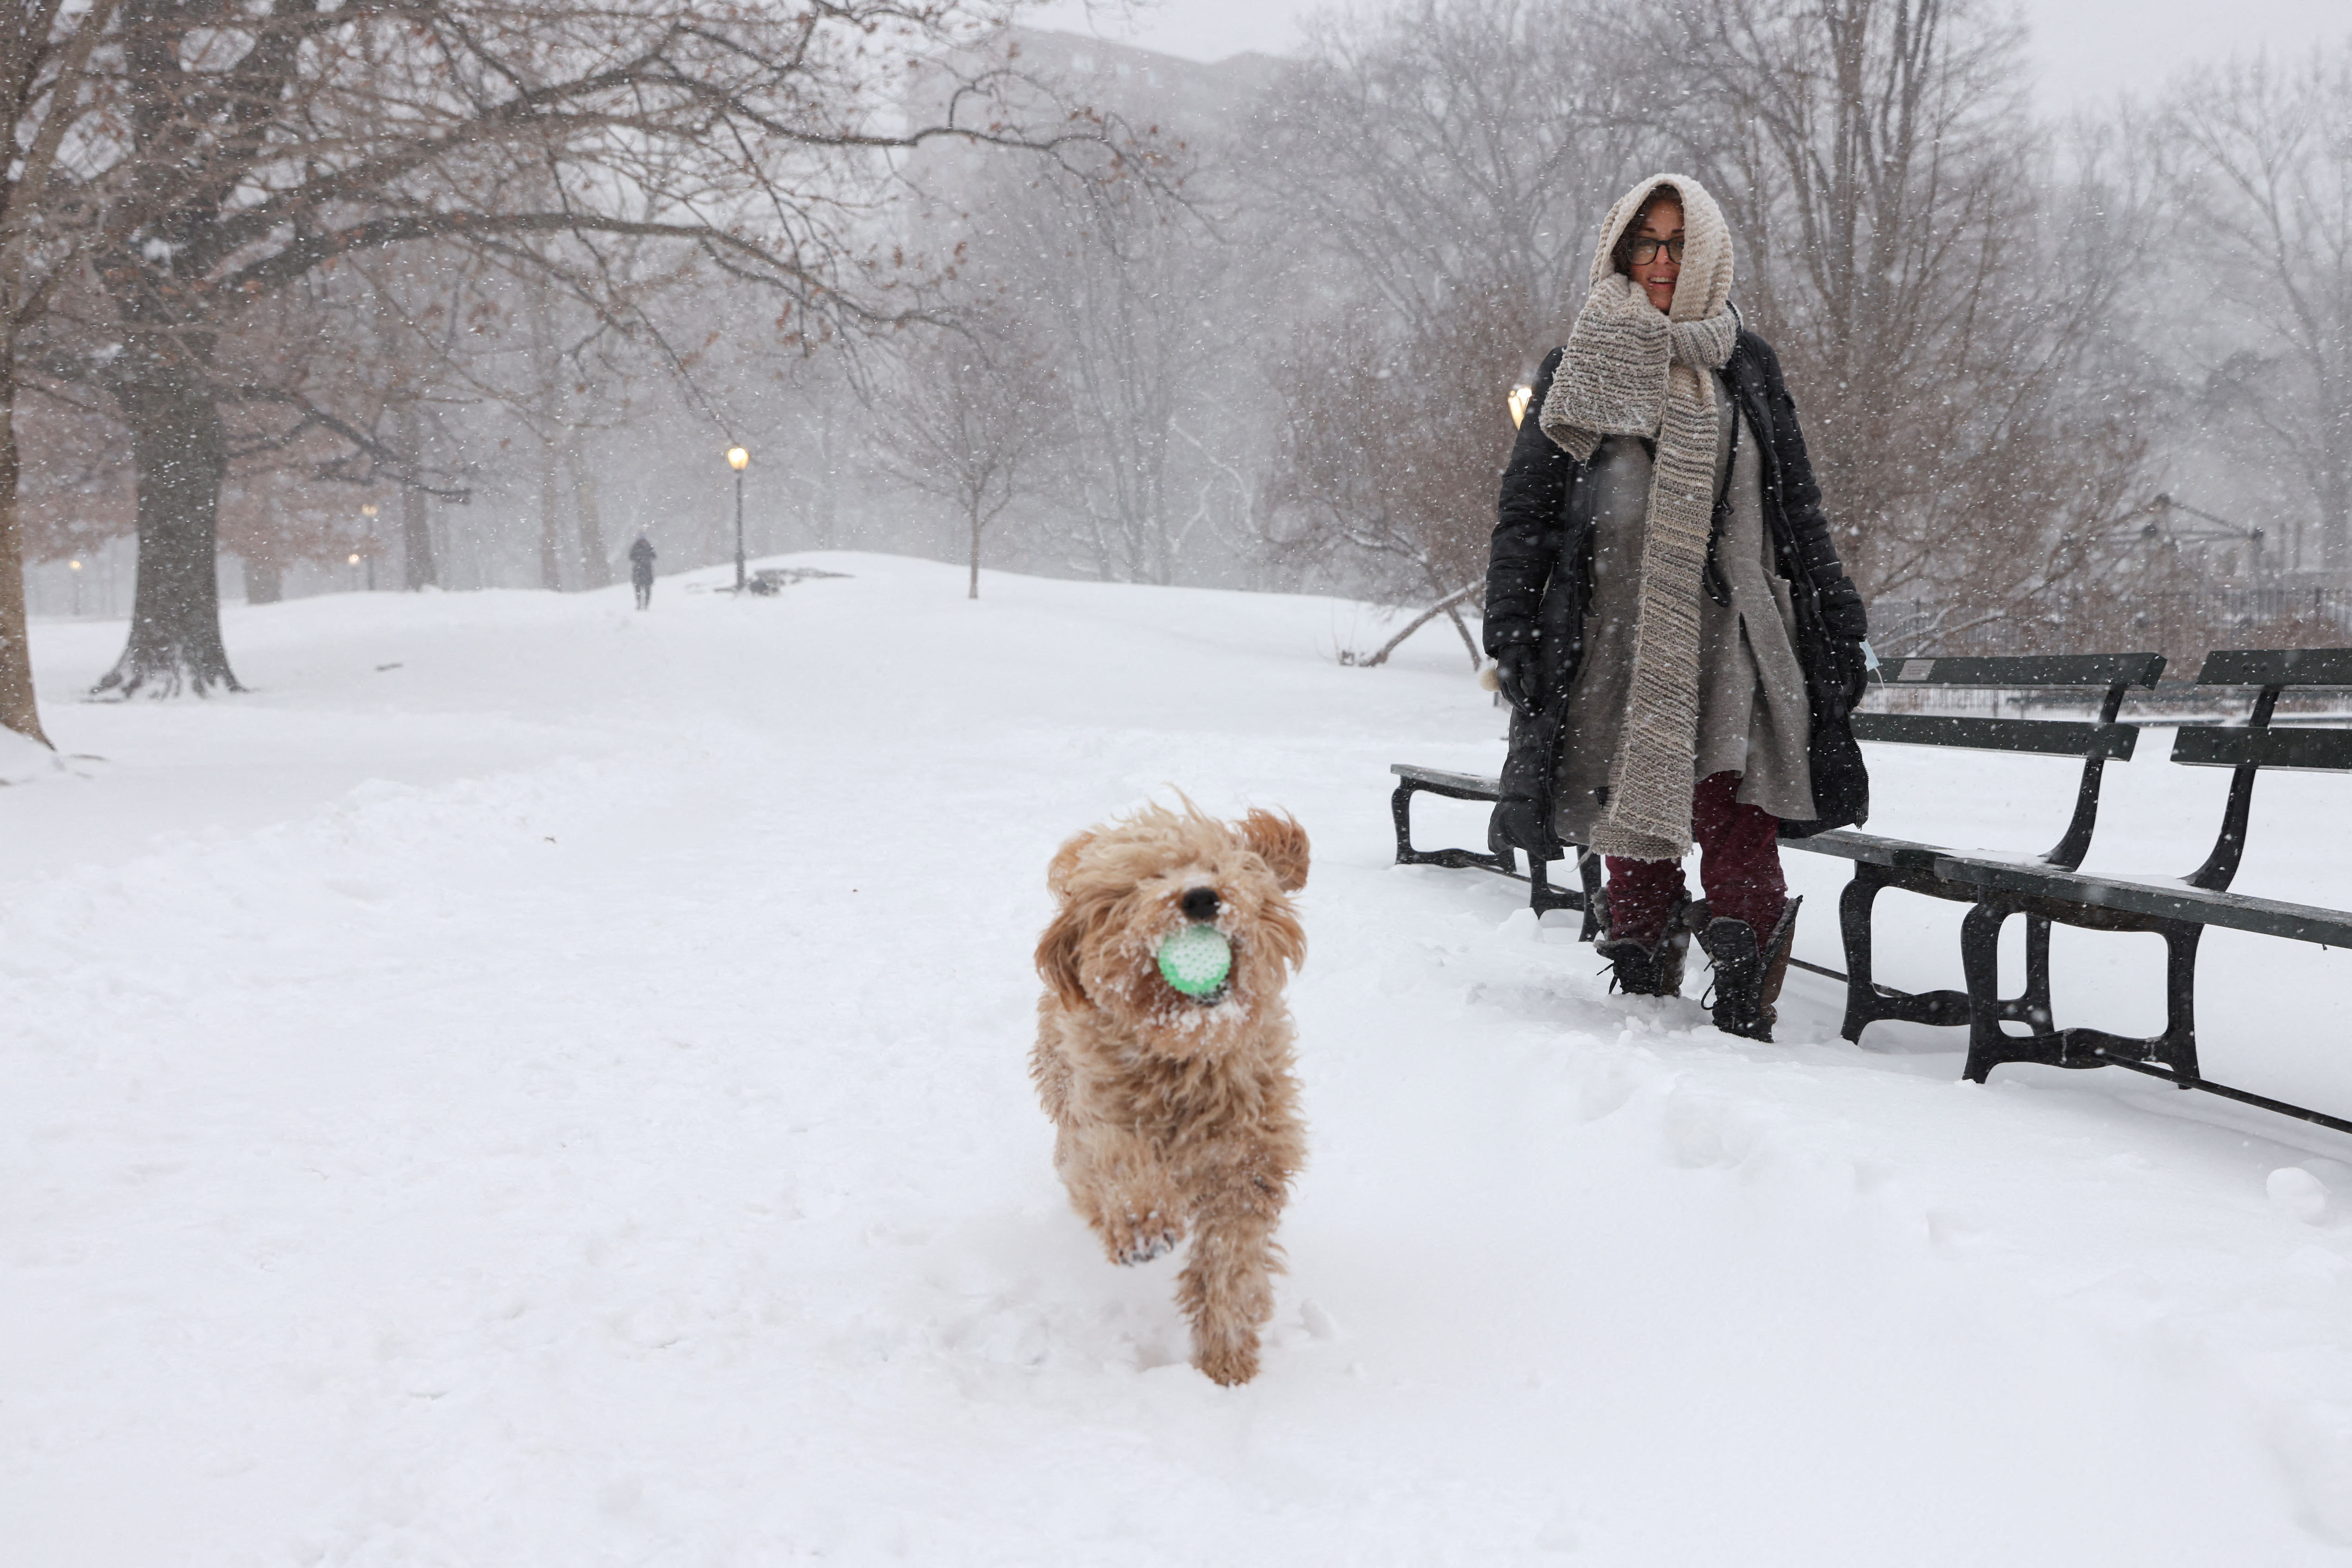 A goldendoodle plays in the snow at Central Park after the Nor'easter storm hit the region, in New York City U.S., January 29, 2022. REUTERS/Caitlin Ochs